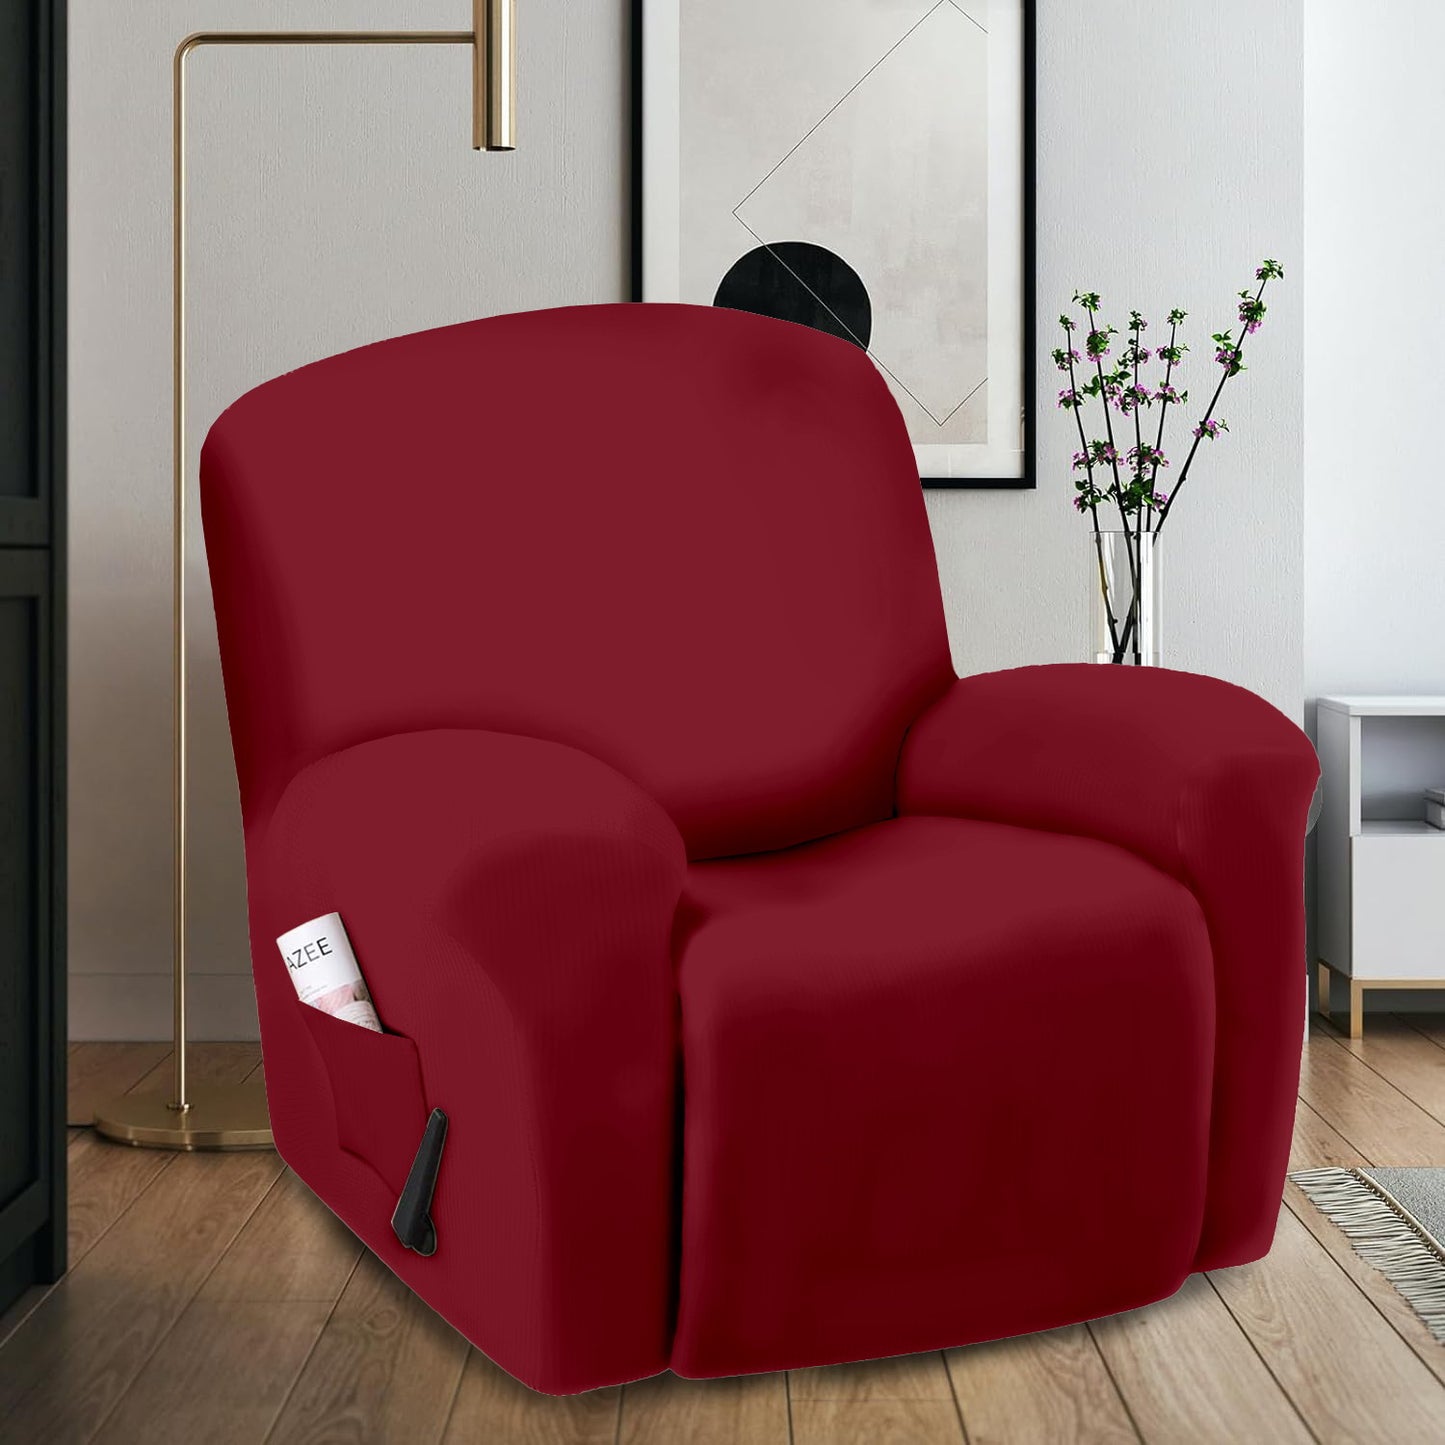 Stretchable Polyester Solid Recliner Cover- Maroon